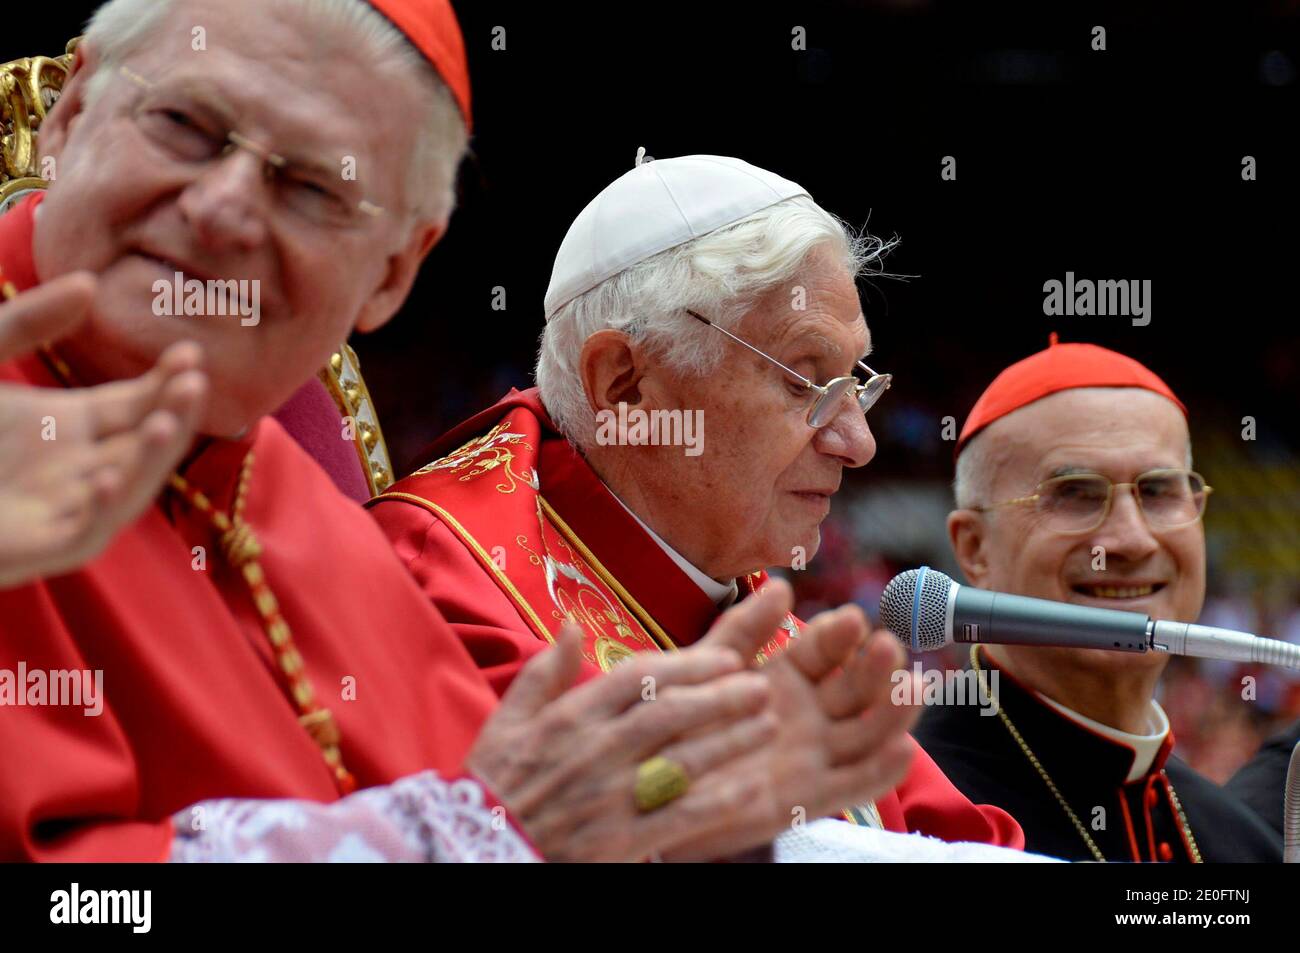 Pope Benedict XVI (c), cardinal Angelo Scola (L) Archbishop of Milan and Vatican Secretary of Sate Tercisio Bertone (r) attend a celebration with candidates for Confirmation at San Siro stadium in Milan, Italy on June 2, 2012 as part of the 7th World Meeting of Families . During this three-day trip in Milan pope Benedict XVI praised the family as 'the principal heritage of humankind'. It is the first time in 28 years that a pope has been to Milan, Italy's economic capital and Europe's biggest diocese with five million inhabitants. Photo by ABACAPRESS.COM Stock Photo